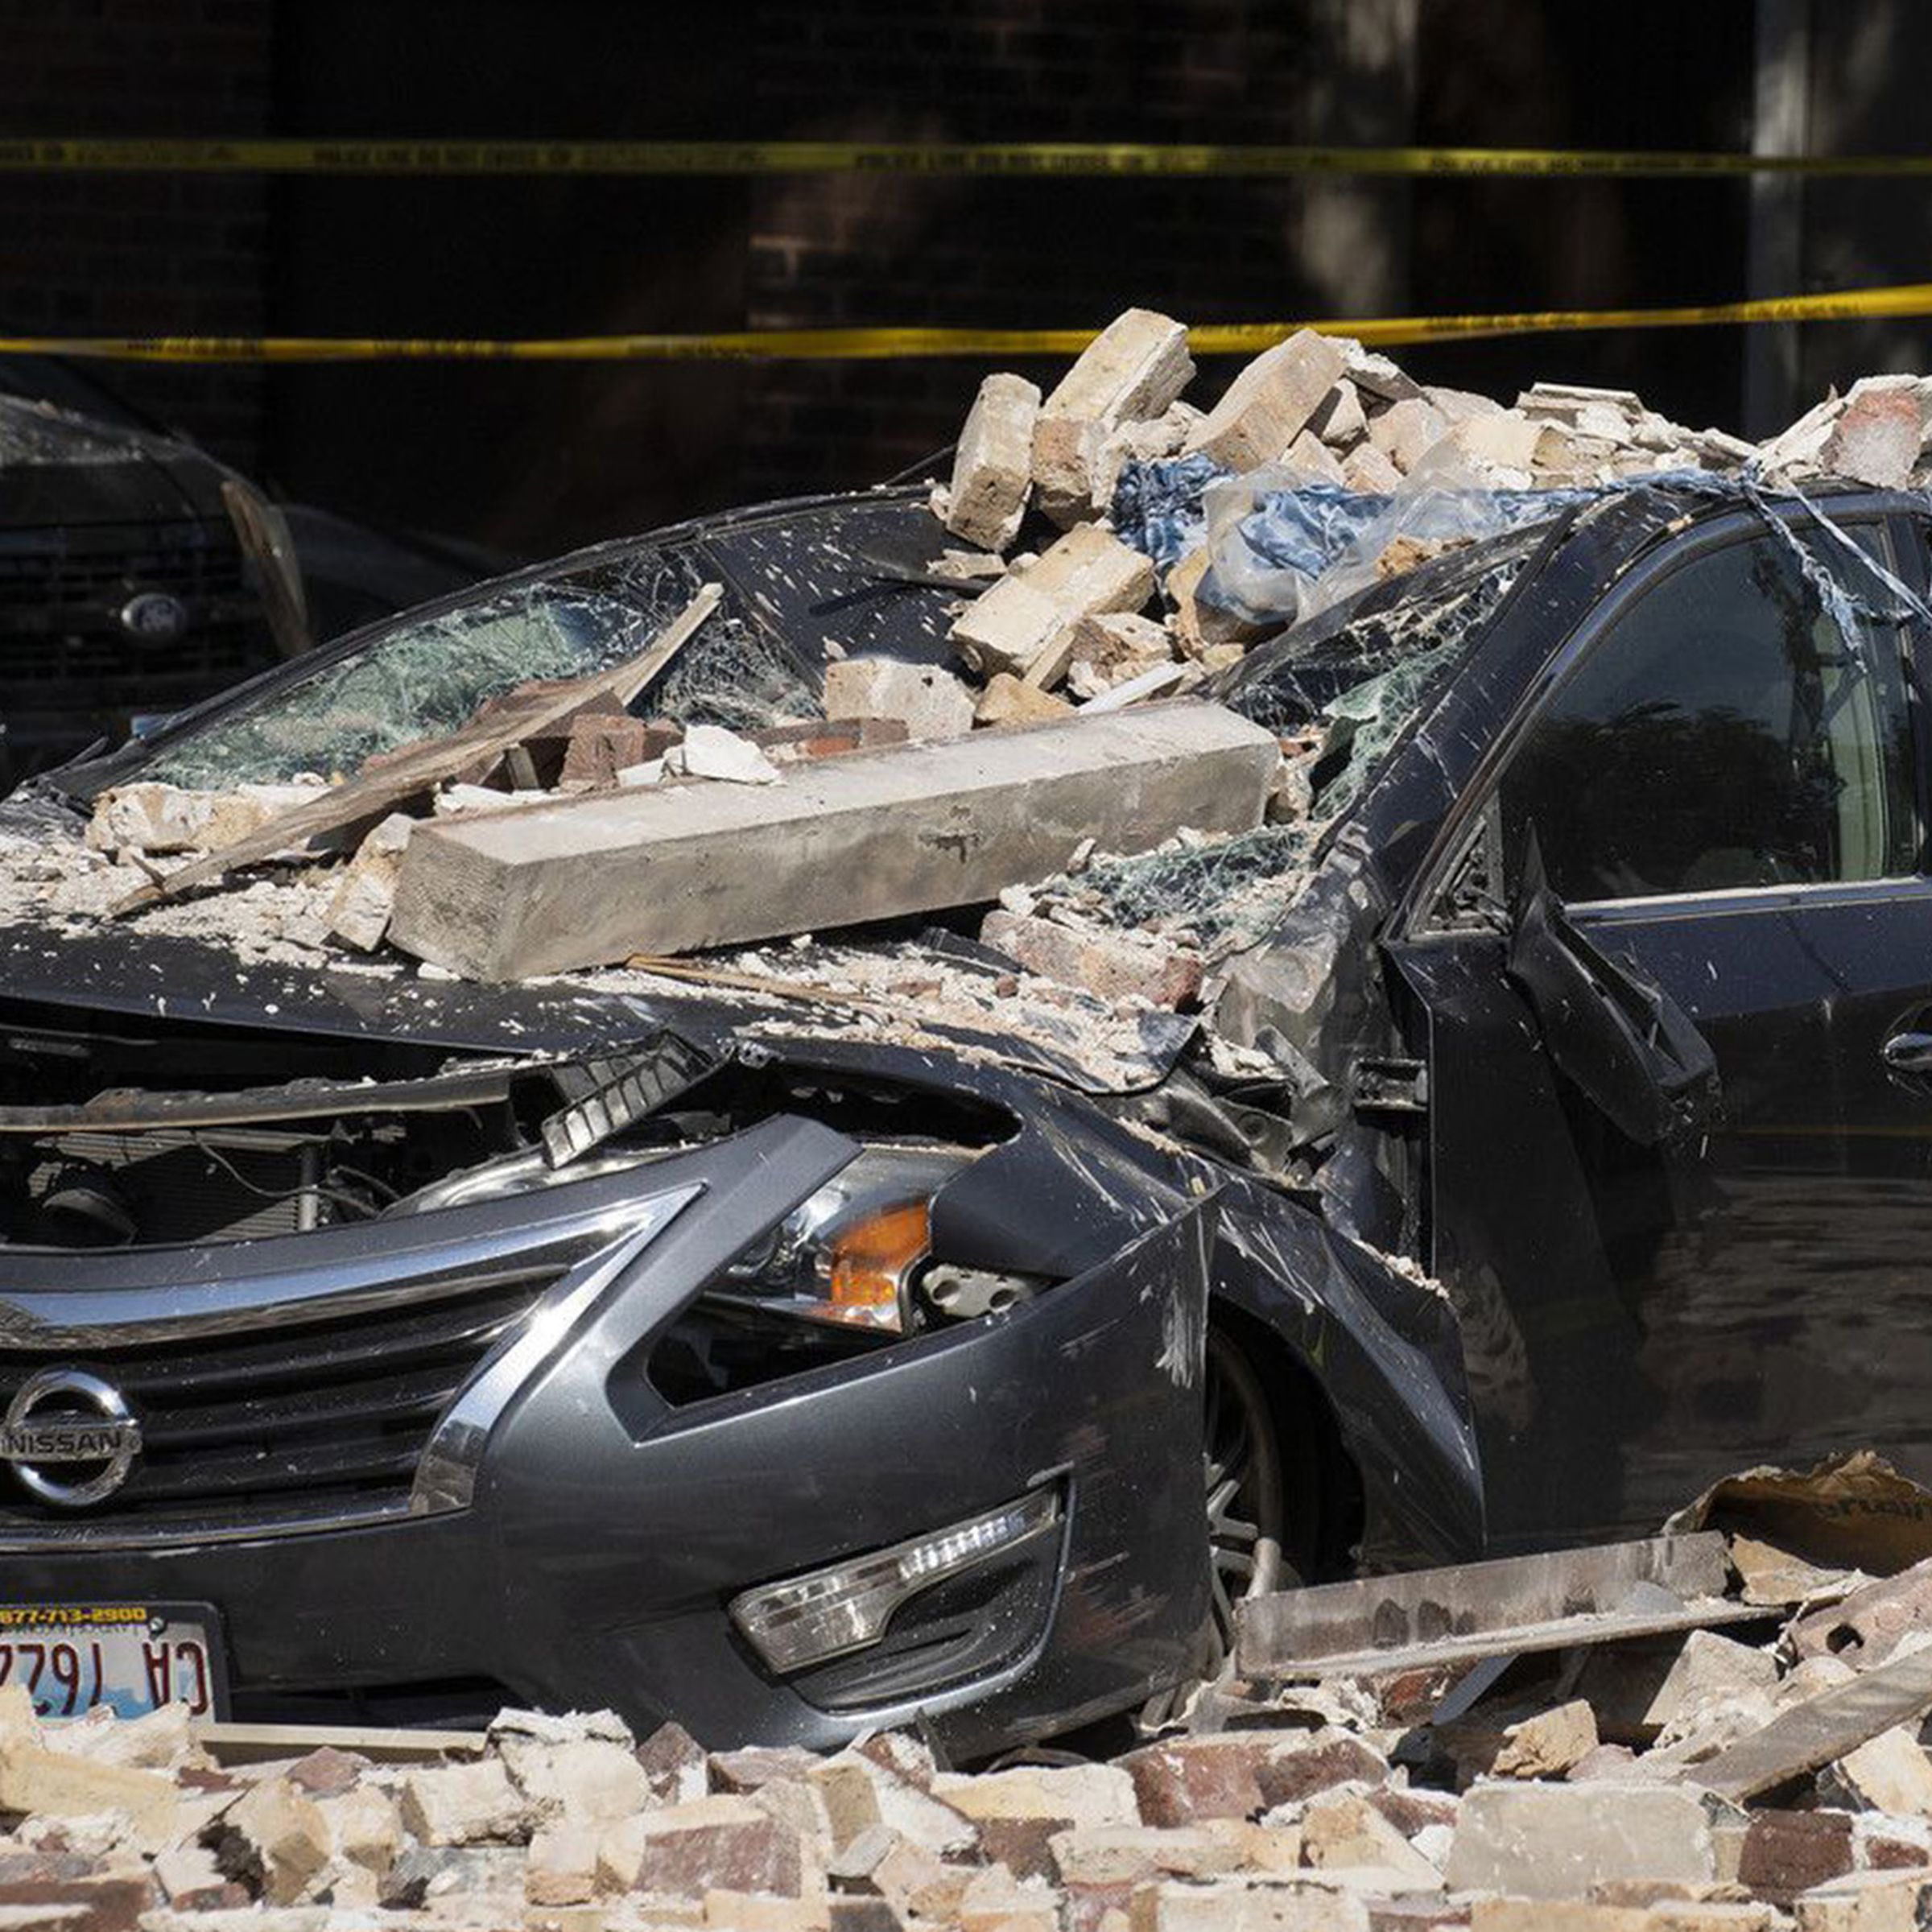 A Chicago firefighter checks a crushed car at the scene where a four-story building partially collapsed due to an explosion on Chicago’s West Side on Tuesday, Sept. 20, 2022.